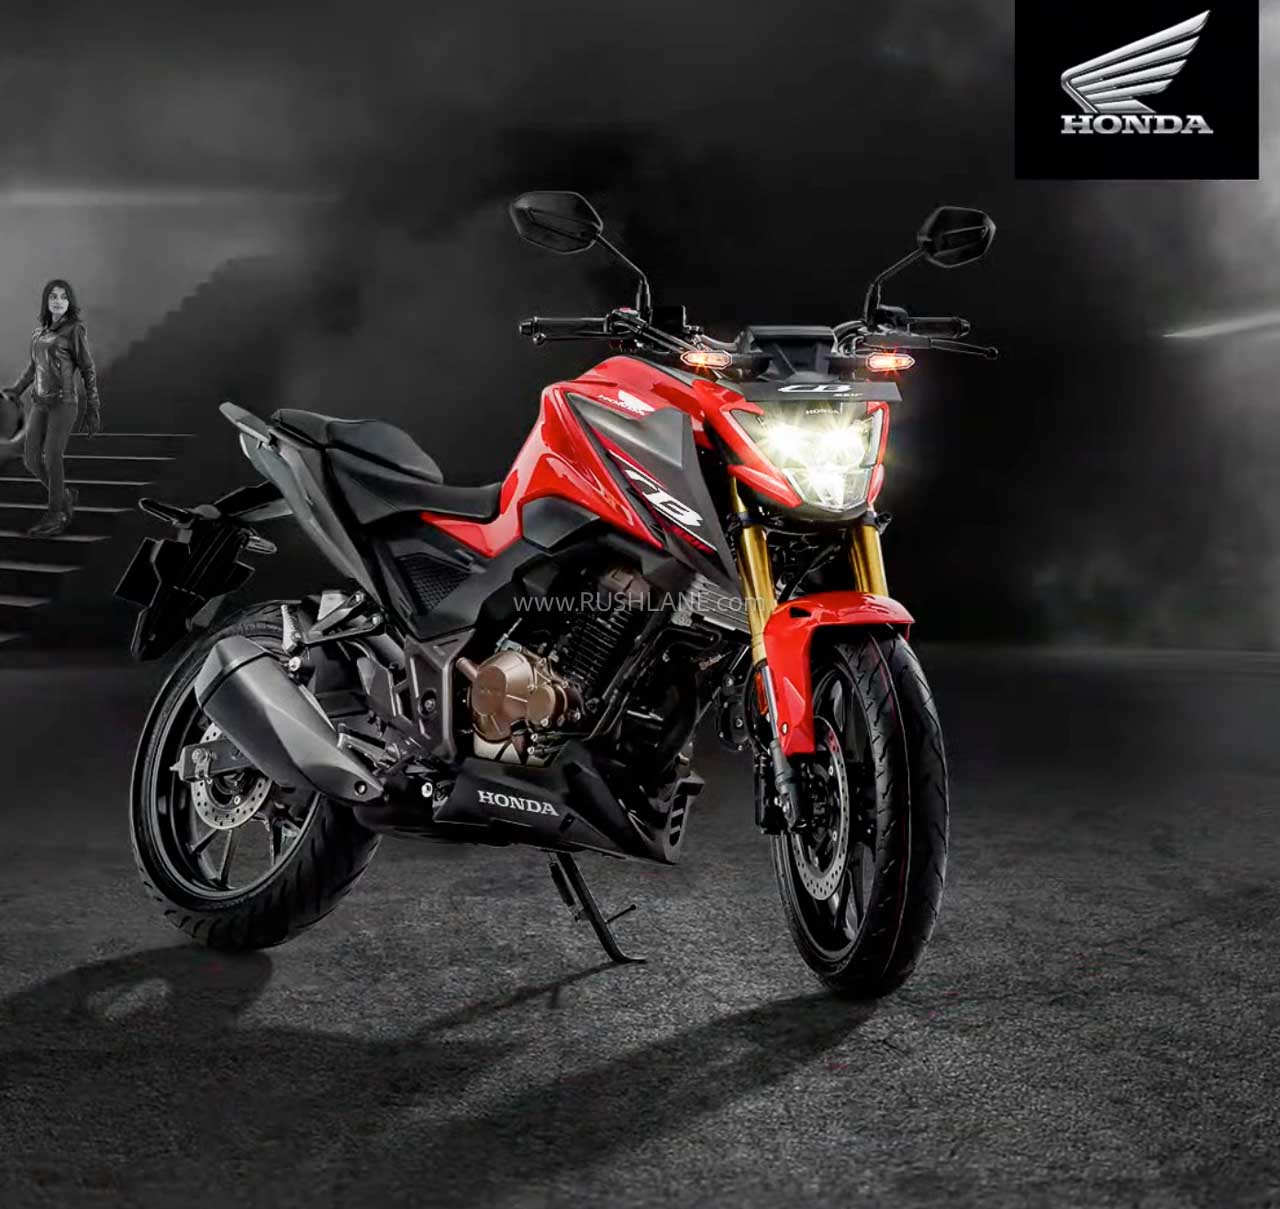 Hondas new 300cc ADV bike retails for only PhP197K  Motorcycle News